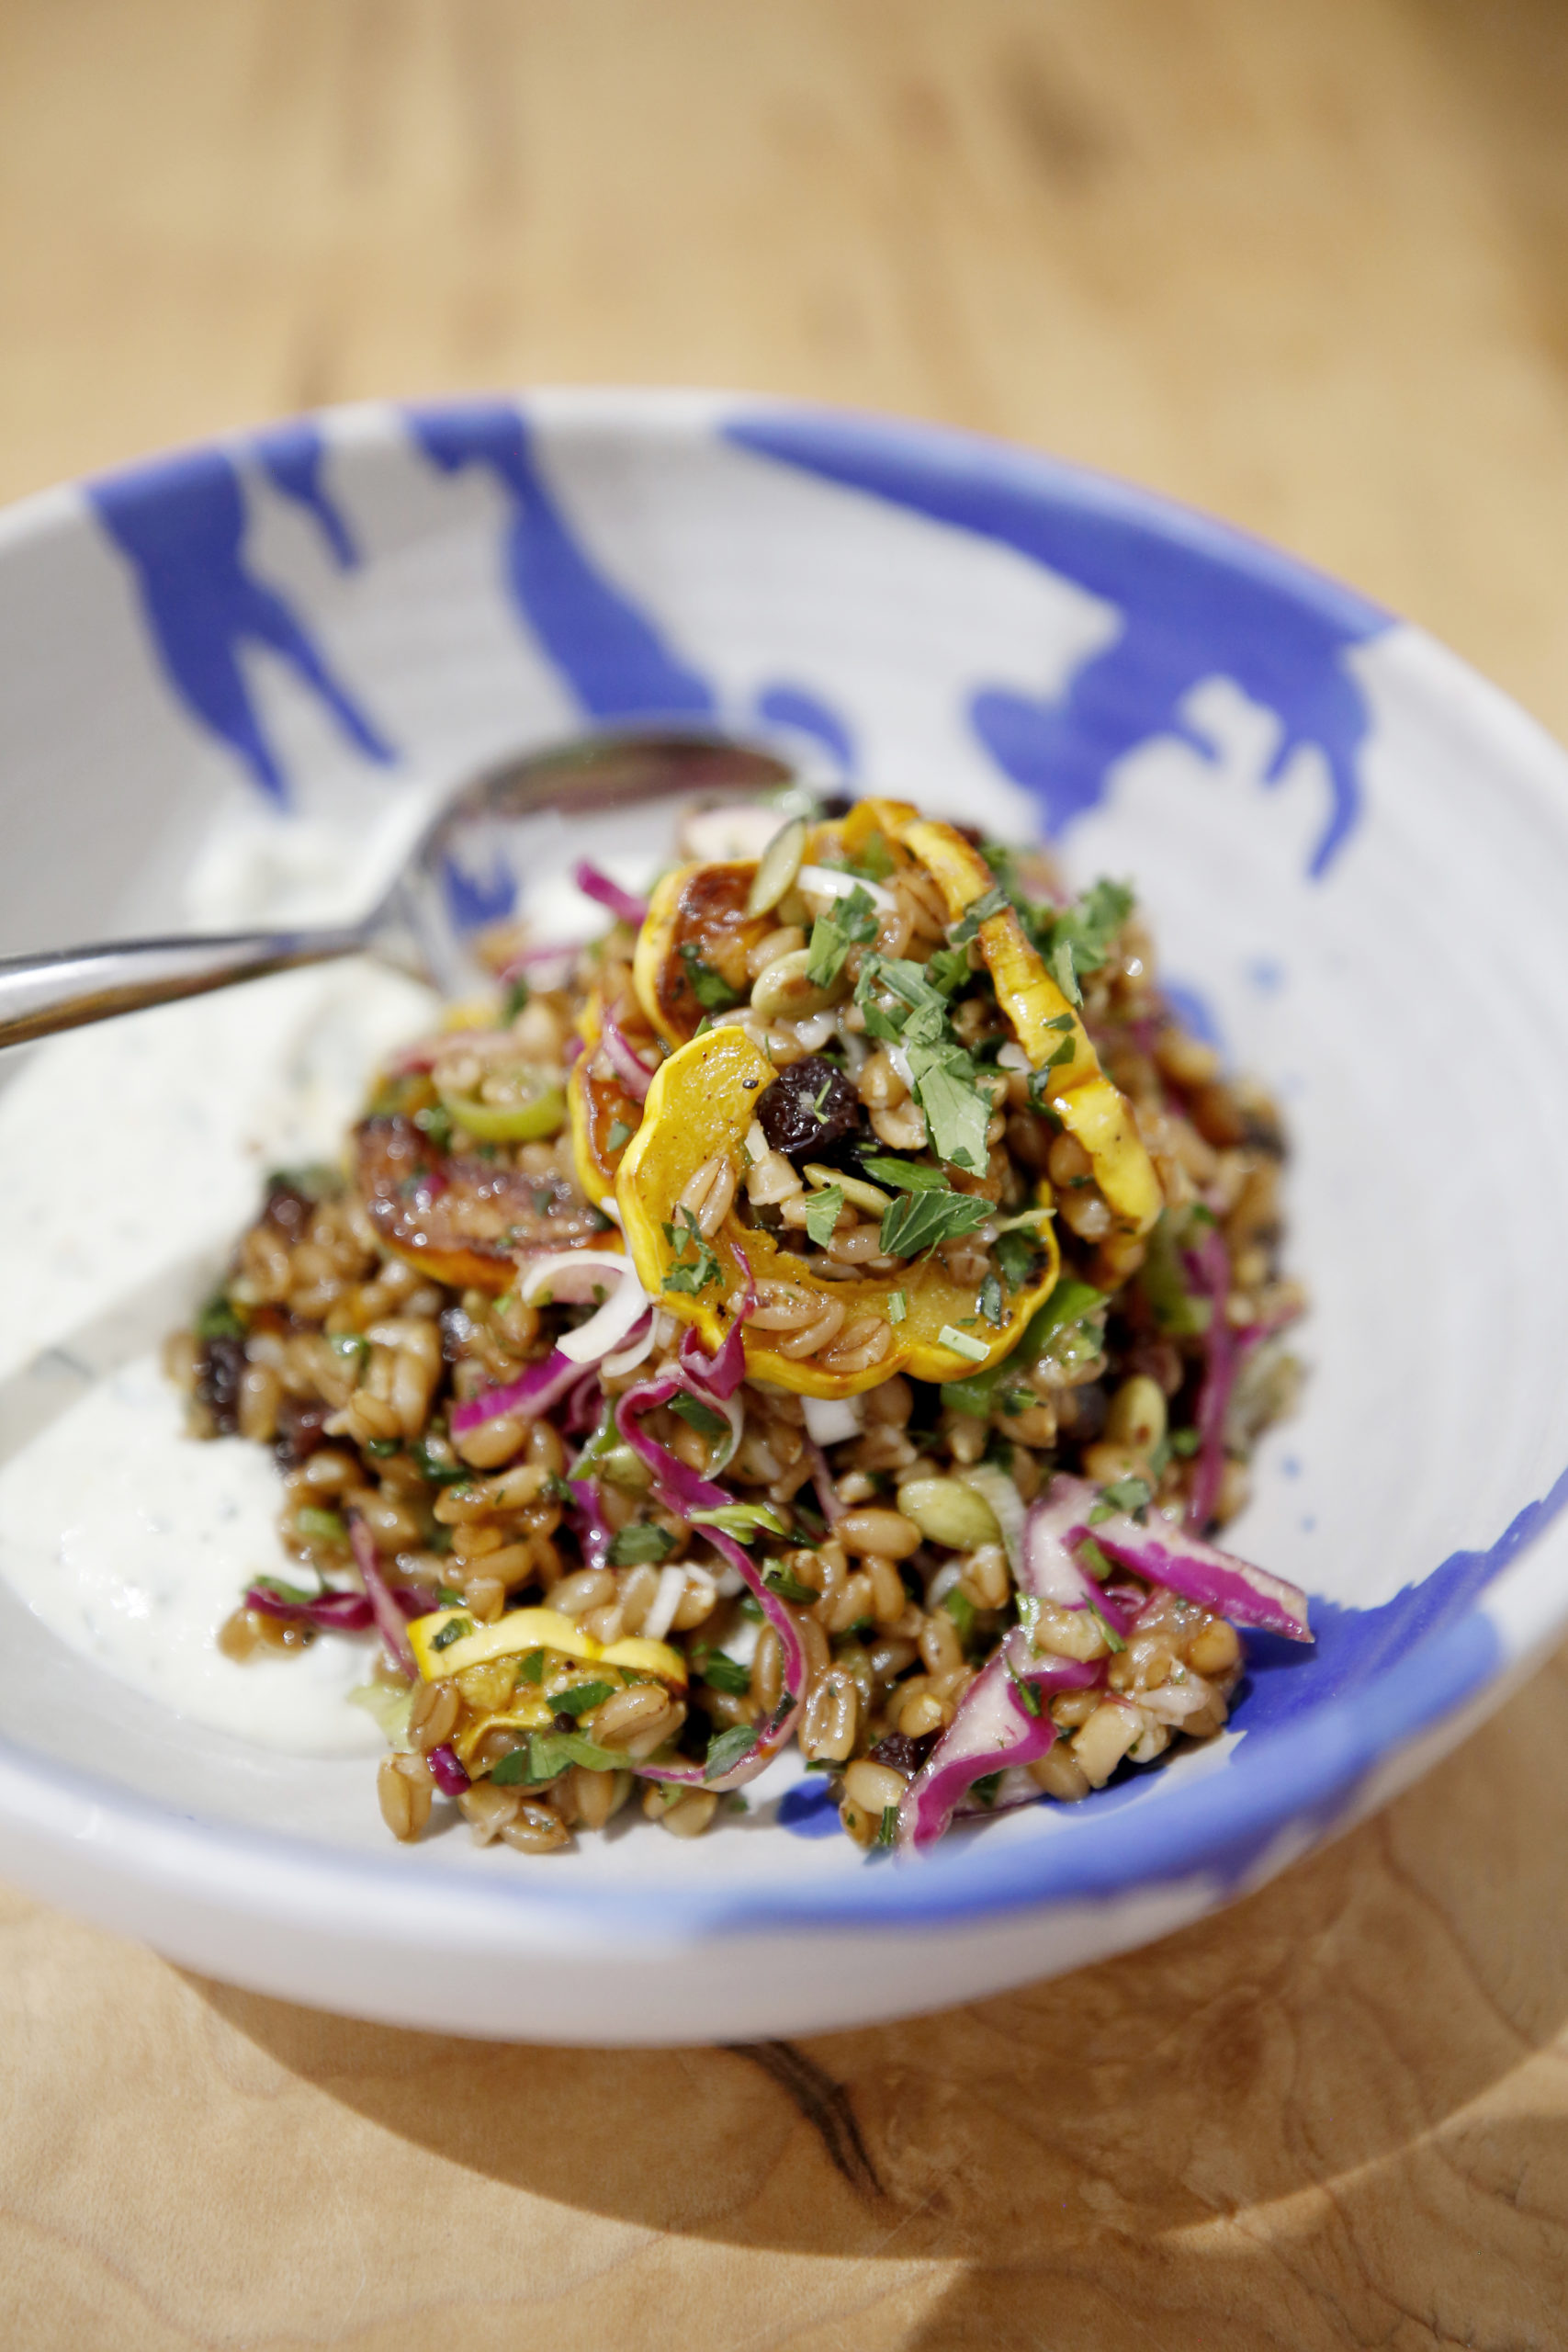 A faro salad with roasted delicata squash, red cabbage, scallions, pipits, fresh herbs, with whipped feta cheese and an apricot jam dressing at Miracle Plum in Santa Rosa, Calif., on Tuesday, July 6, 2021.(Beth Schlanker/The Press Democrat)